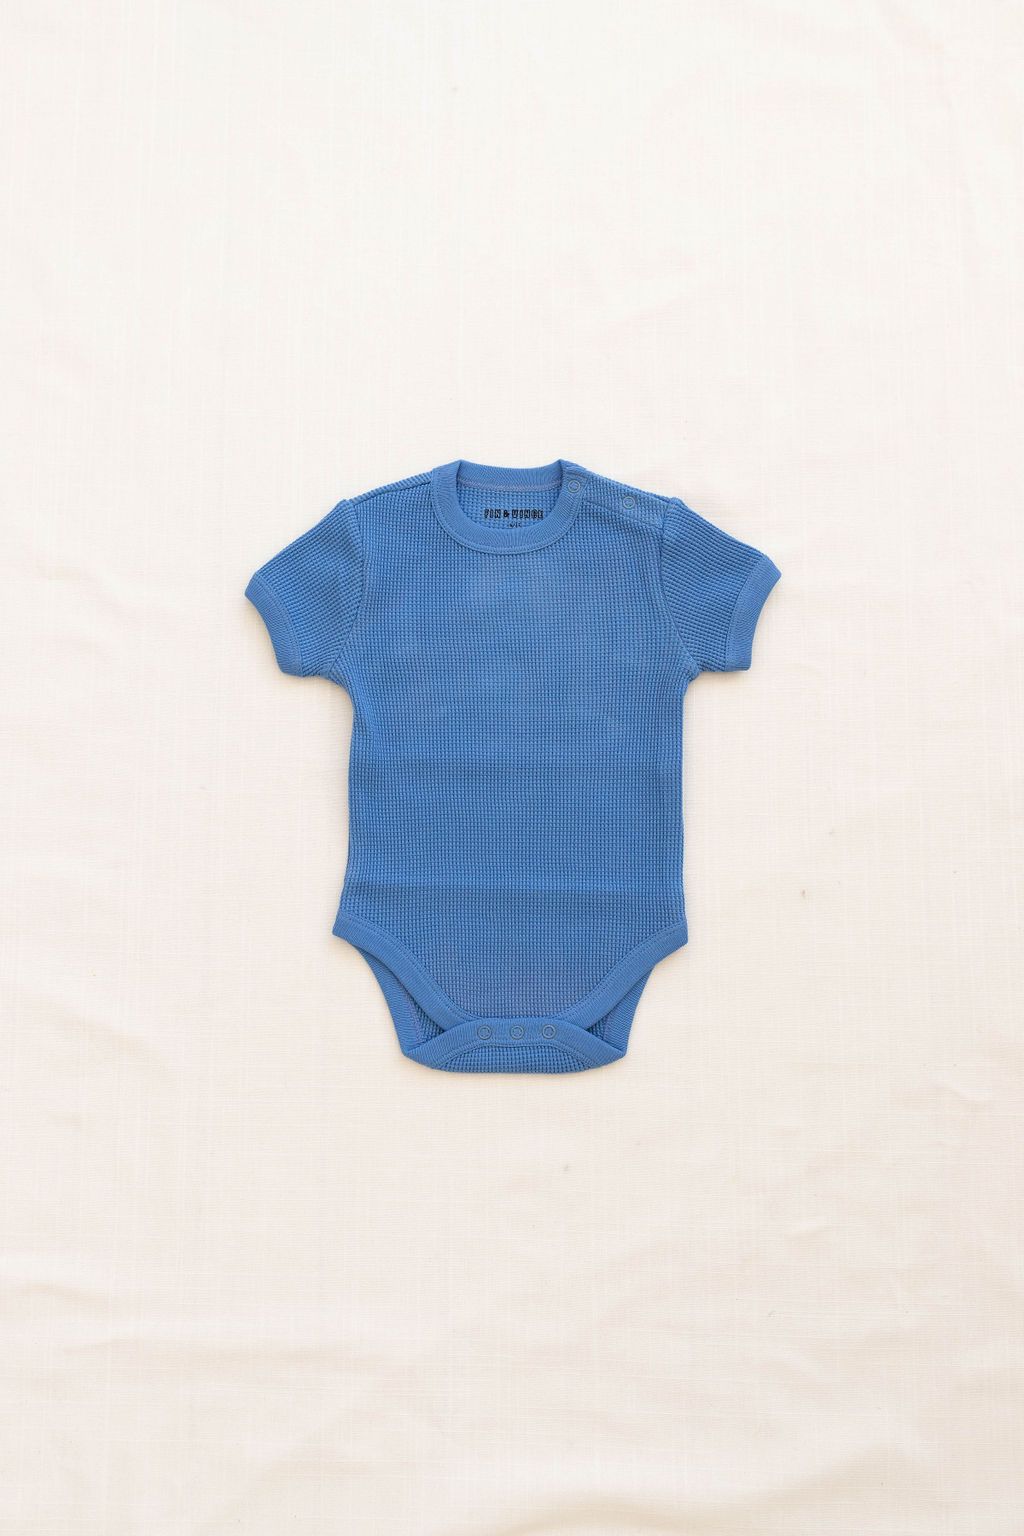 Fin & Vince Primary Onesie, Marina Waffle